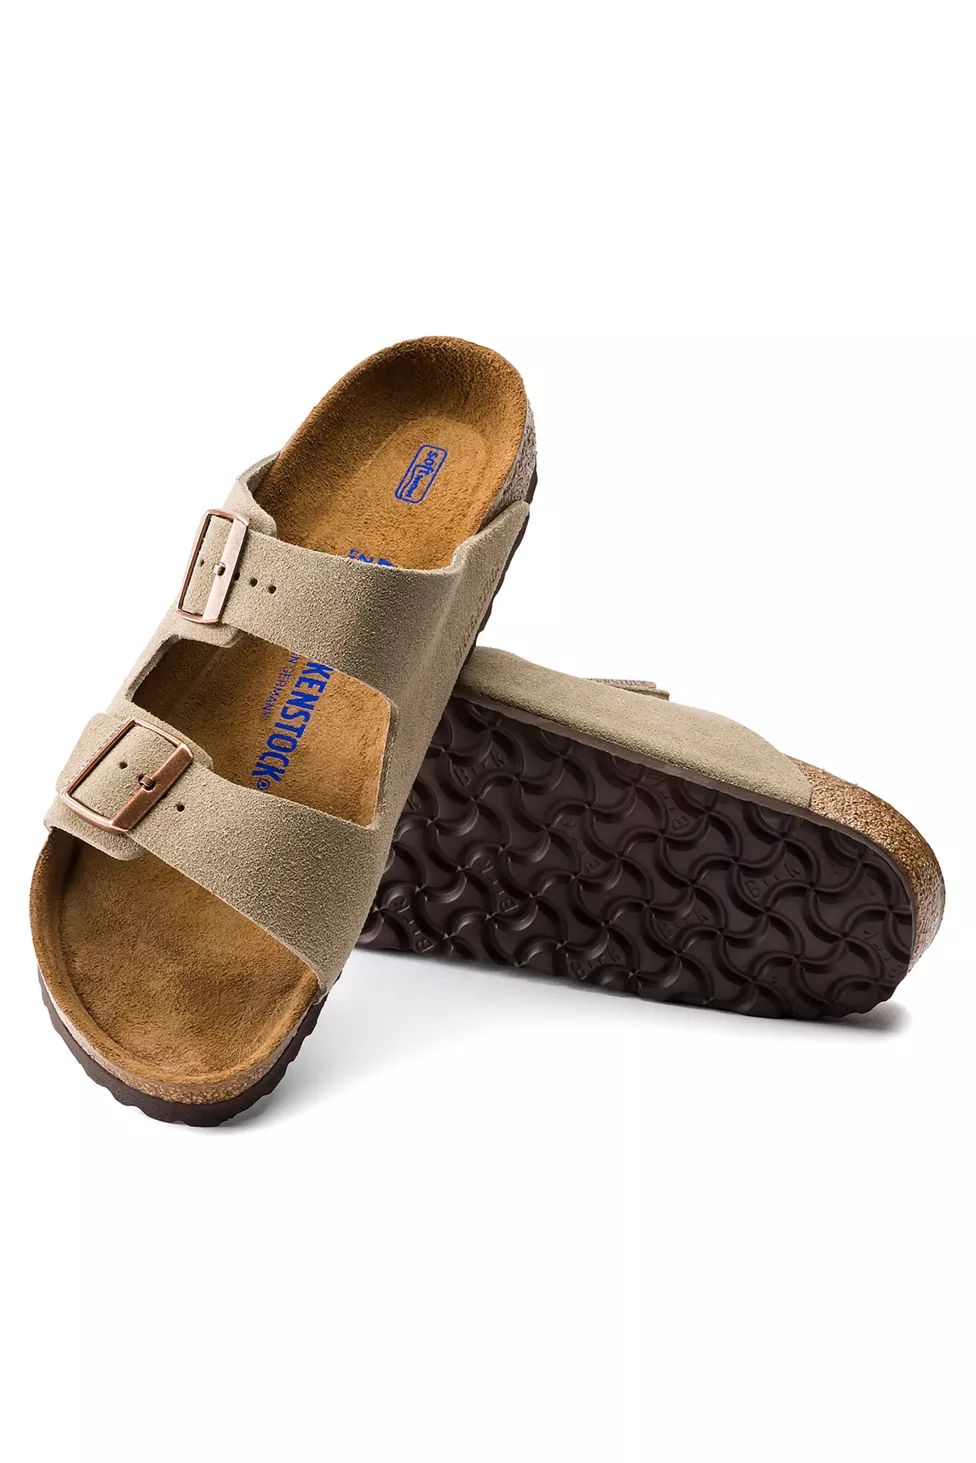 Birkenstock Arizona Soft Footbed Sandal | Urban Outfitters (US and RoW)